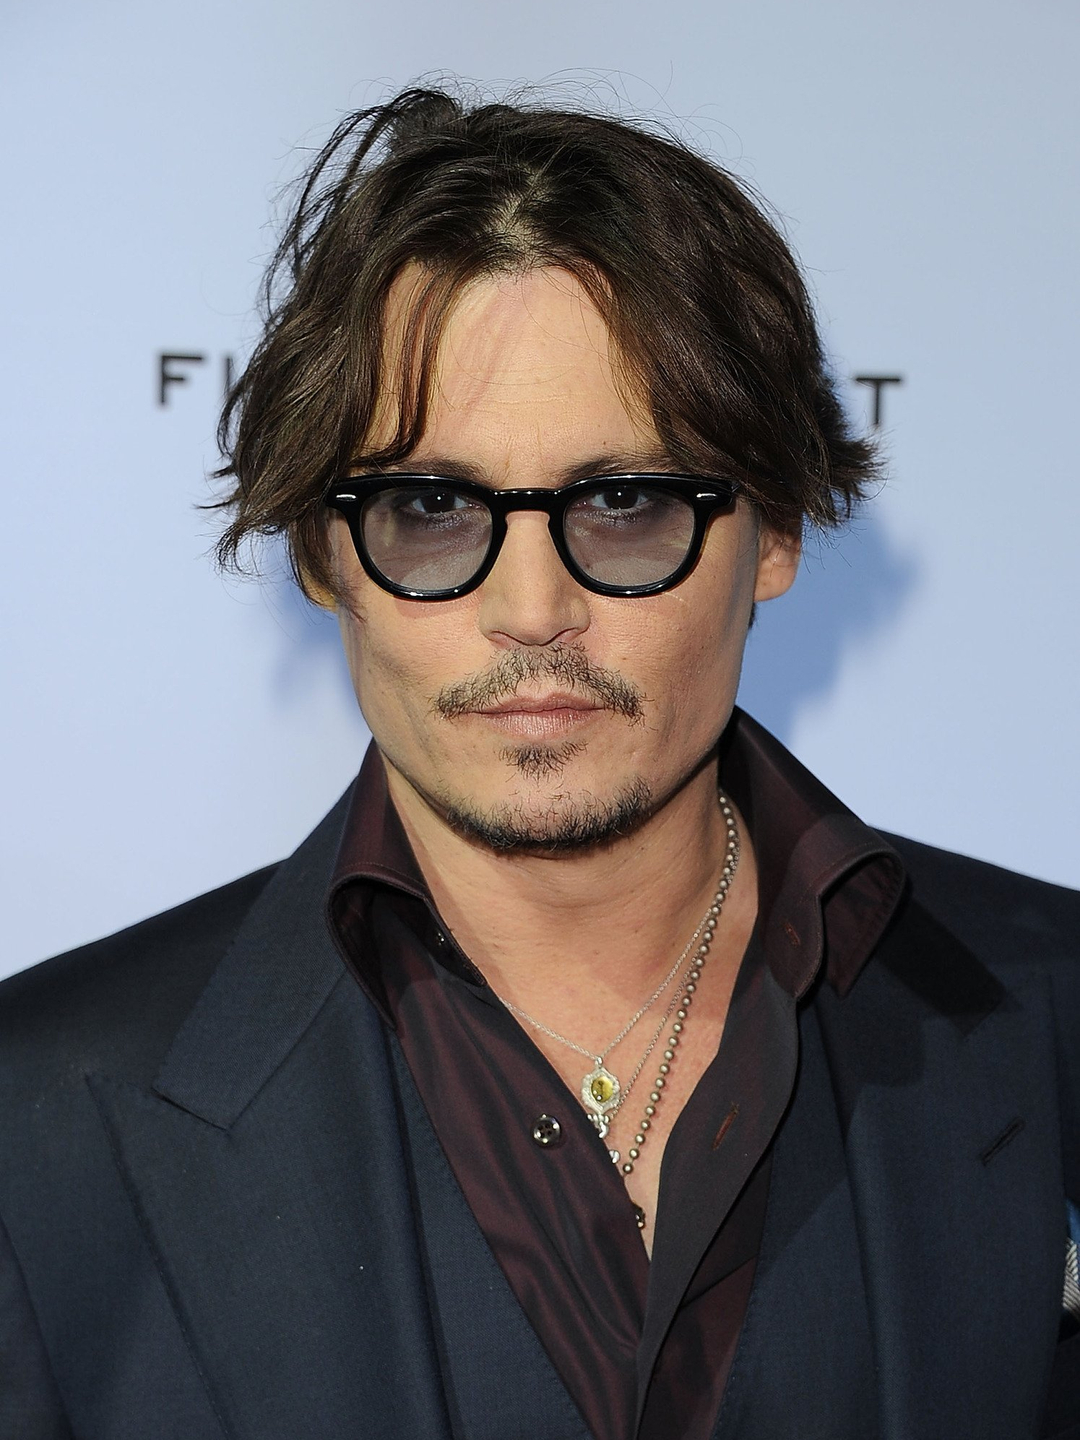 Johnny Depp who is his father